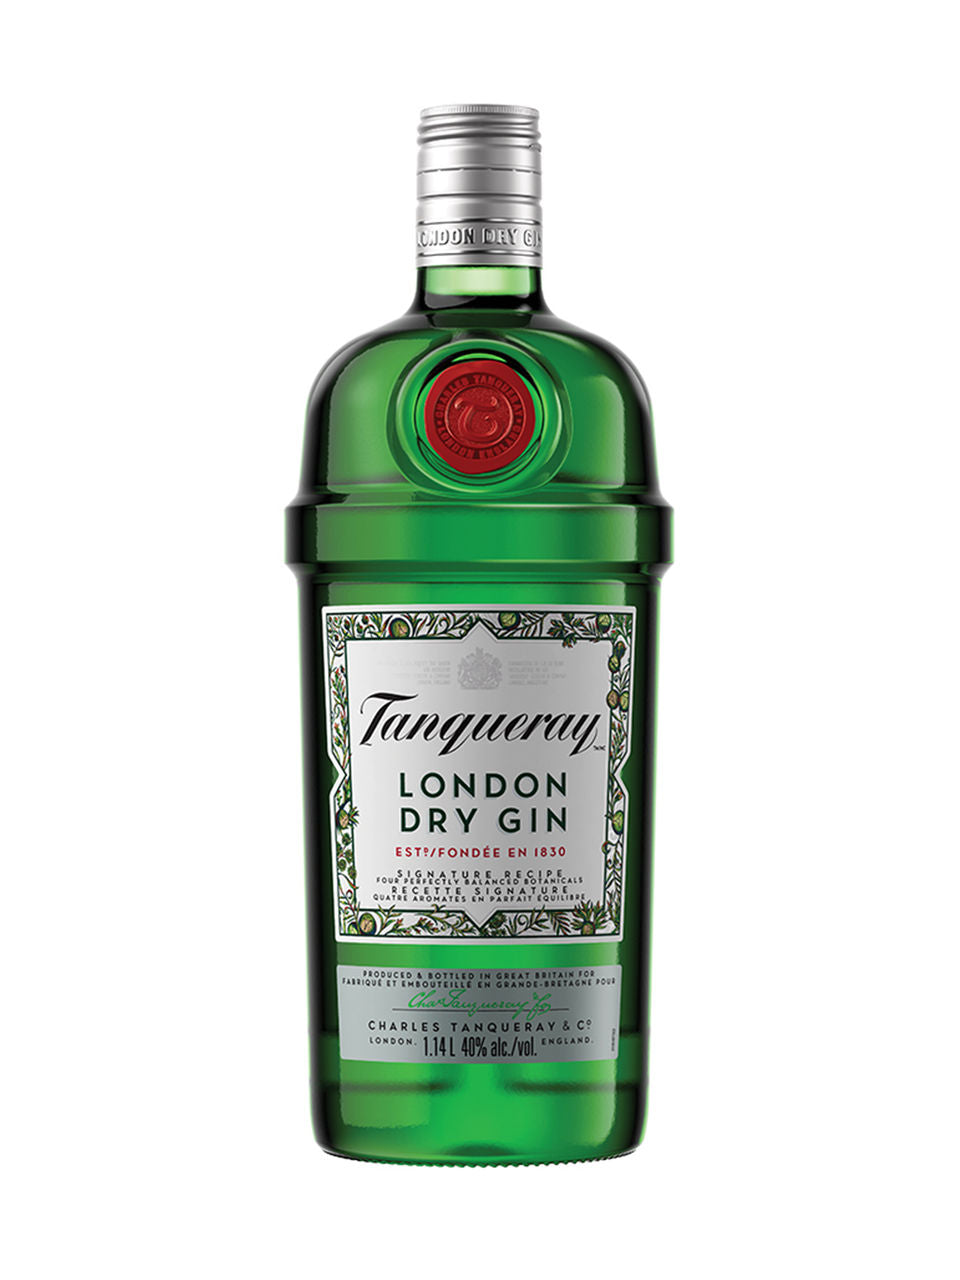 Tanqueray London Dry Gin 1140 mL bottle